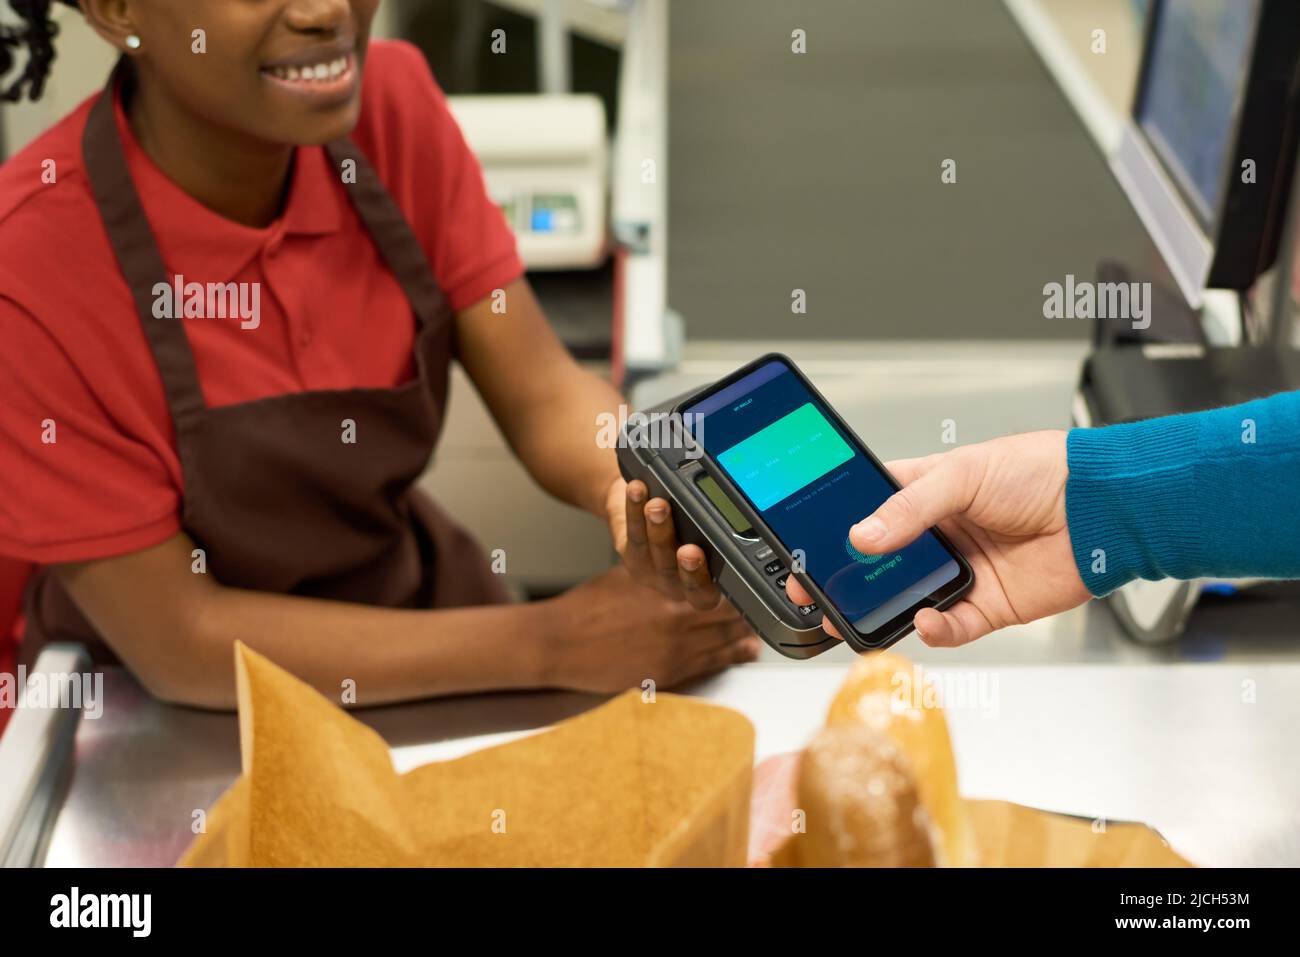 Hand of consumer with smartphone paying for food products by contactless payment while standing by counter in supermarket Stock Photo